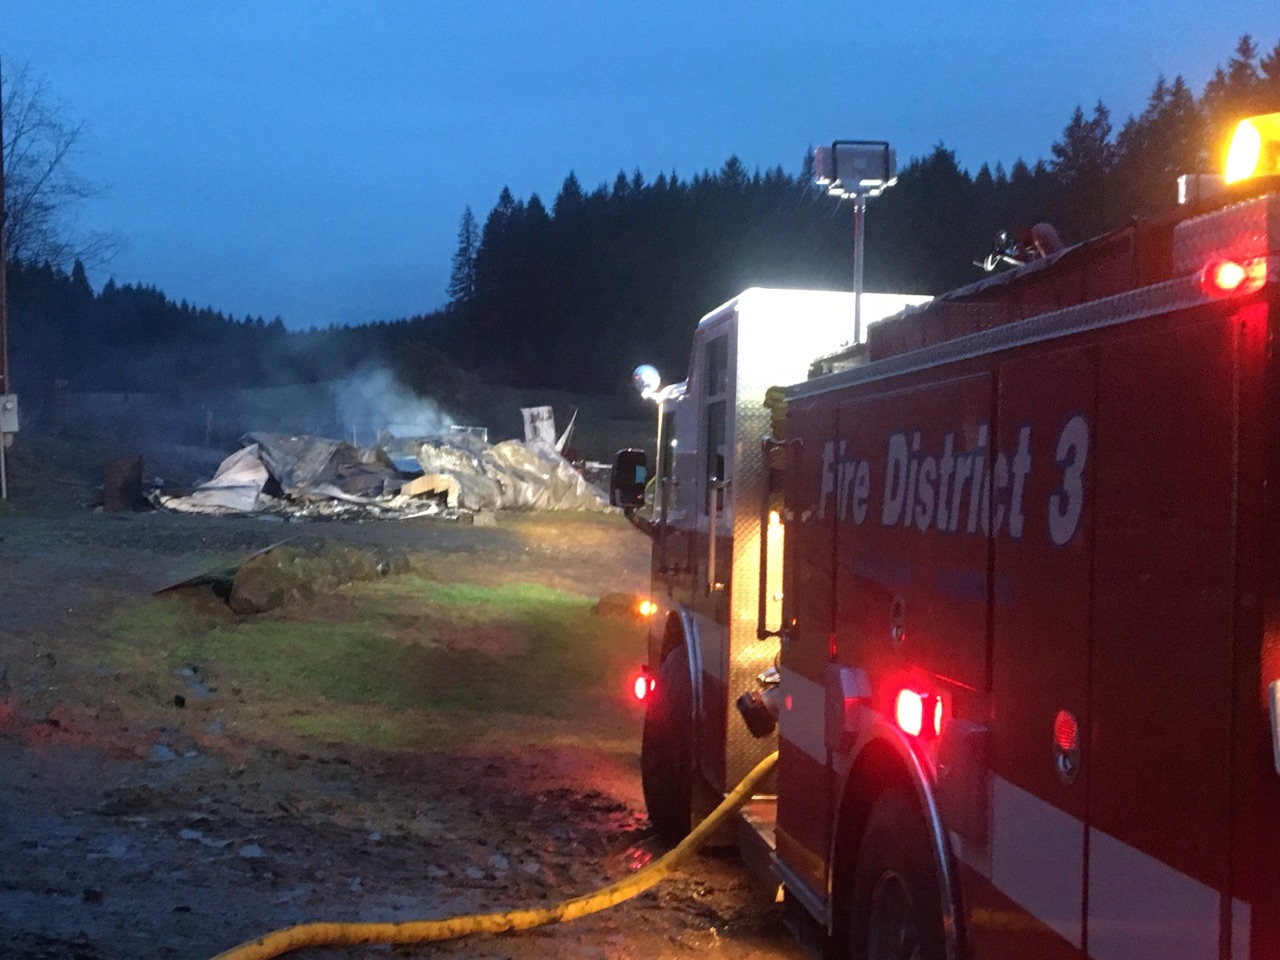 A mobile home was destroyed by a fire early this morning and firefighters are still unsure if anyone was inside.